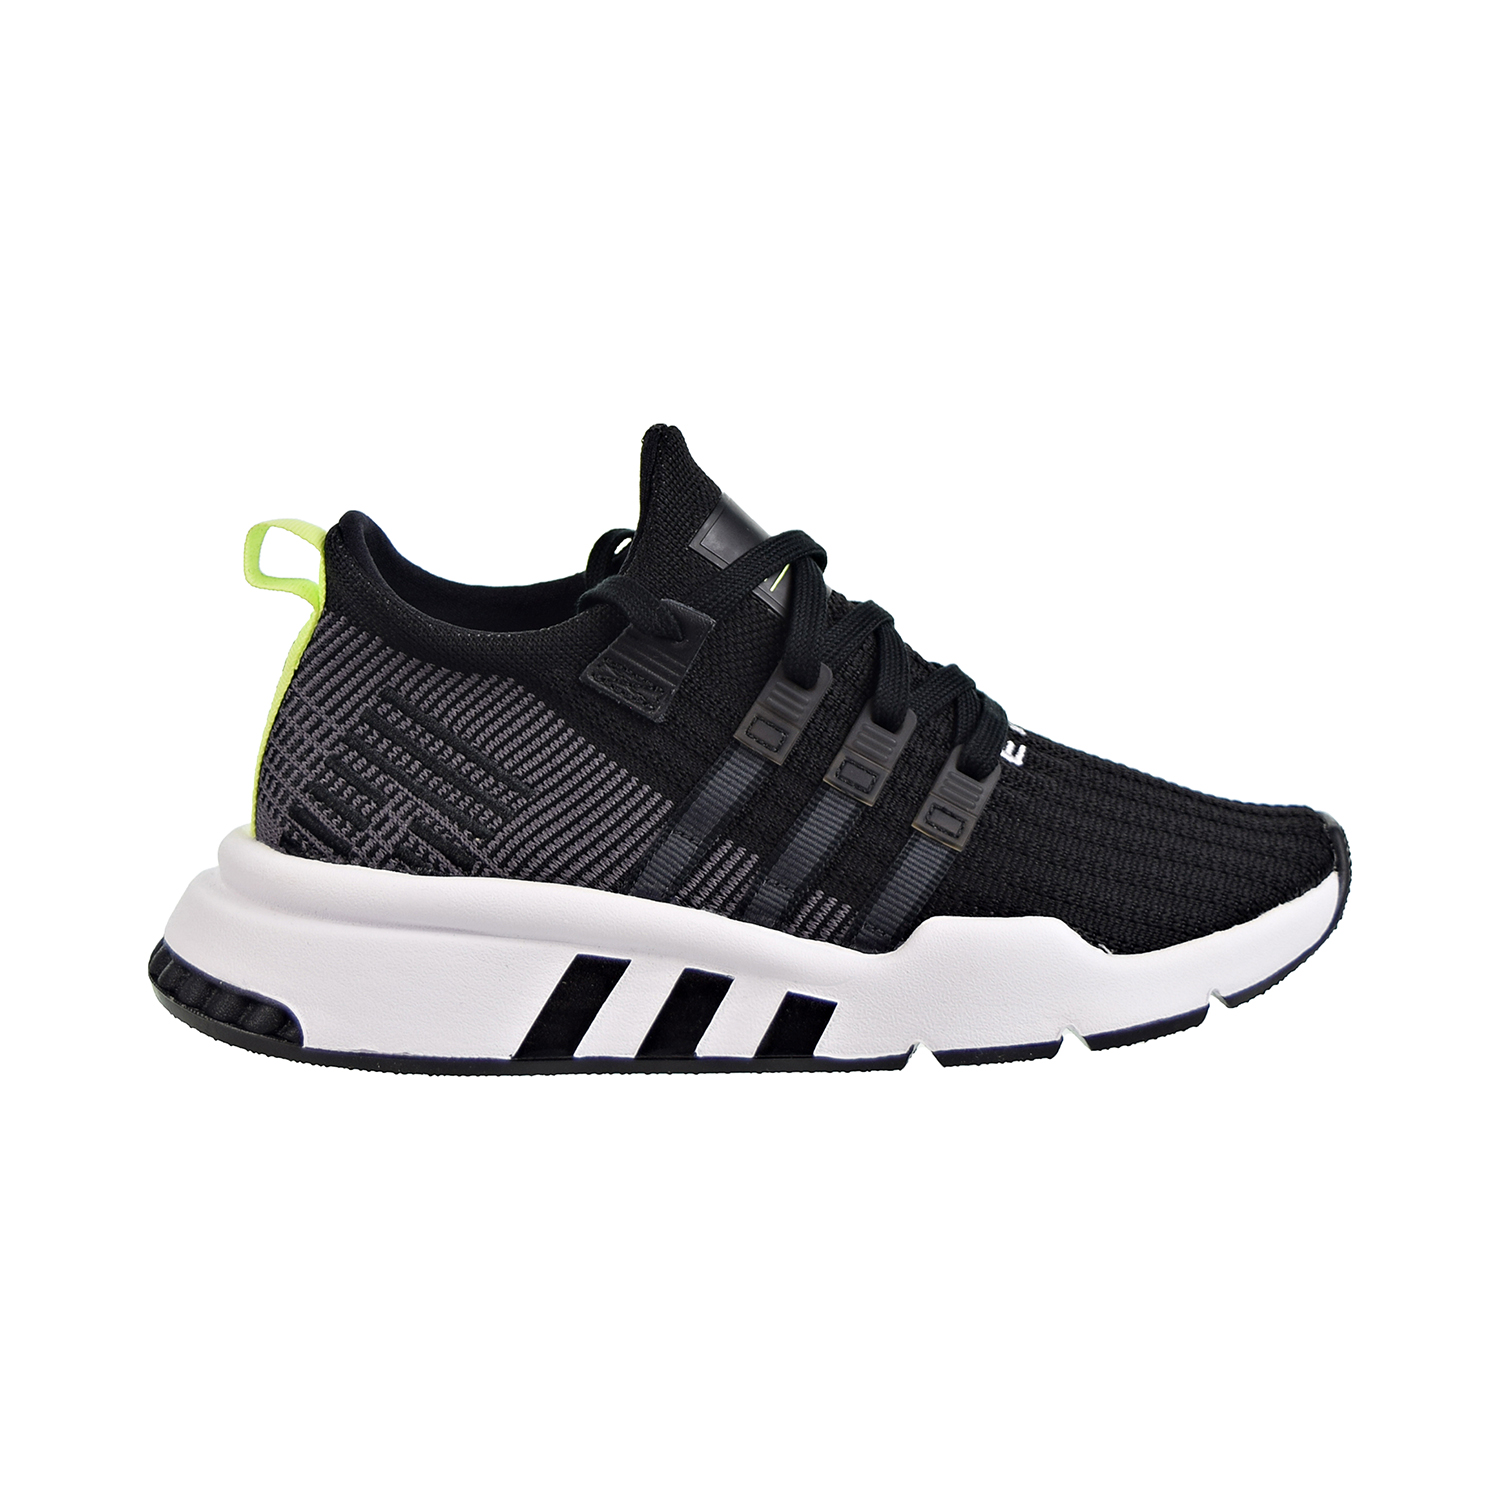 eqt support adv mid shoes